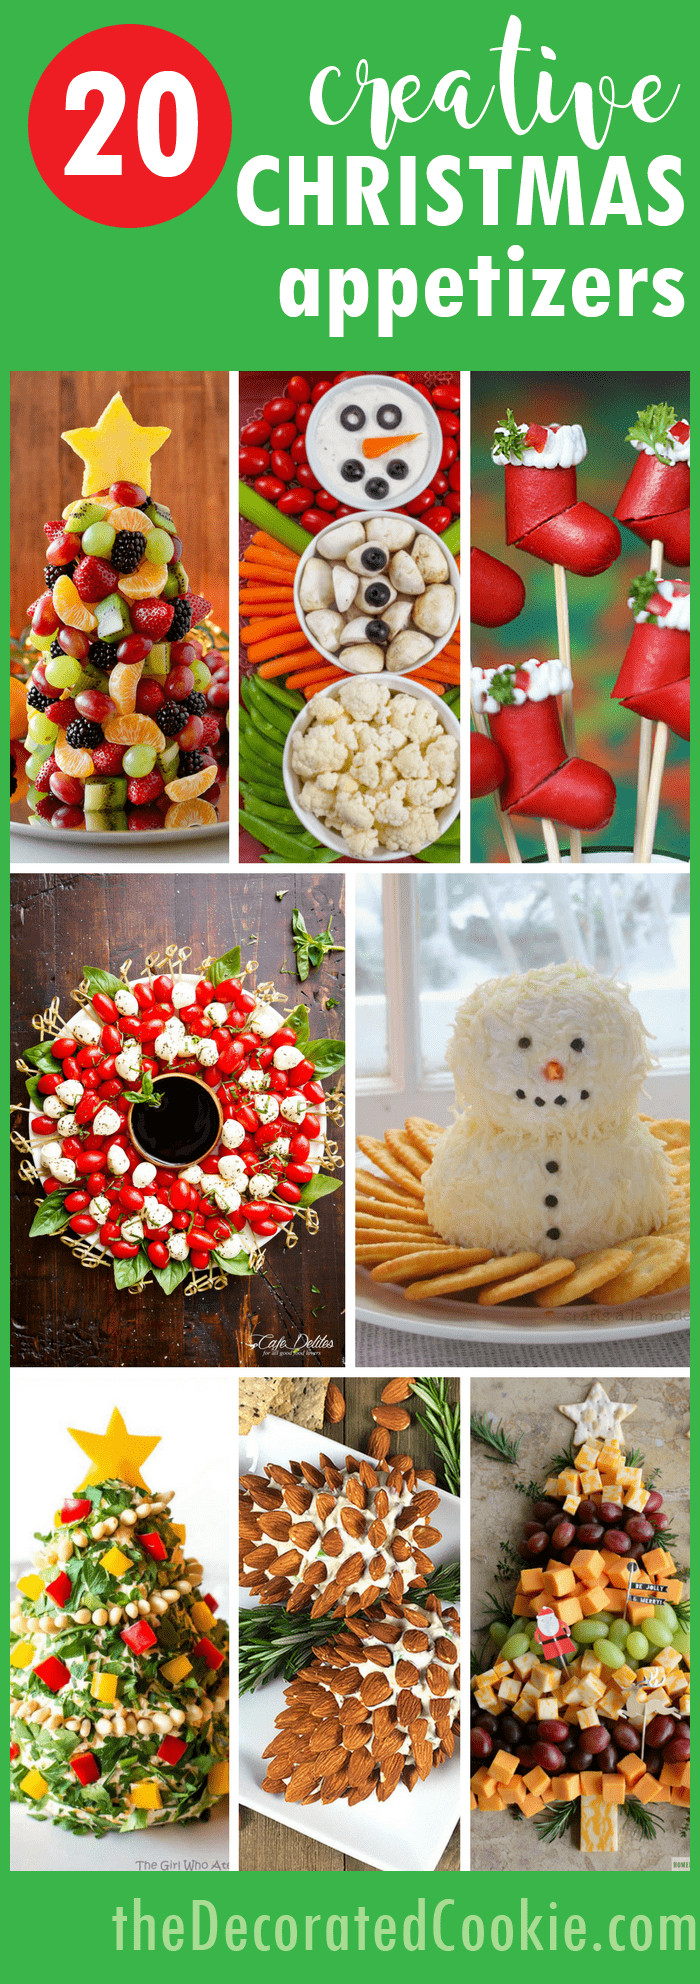 Creative Holiday Party Ideas
 20 creative Christmas appetizers The Decorated Cookie